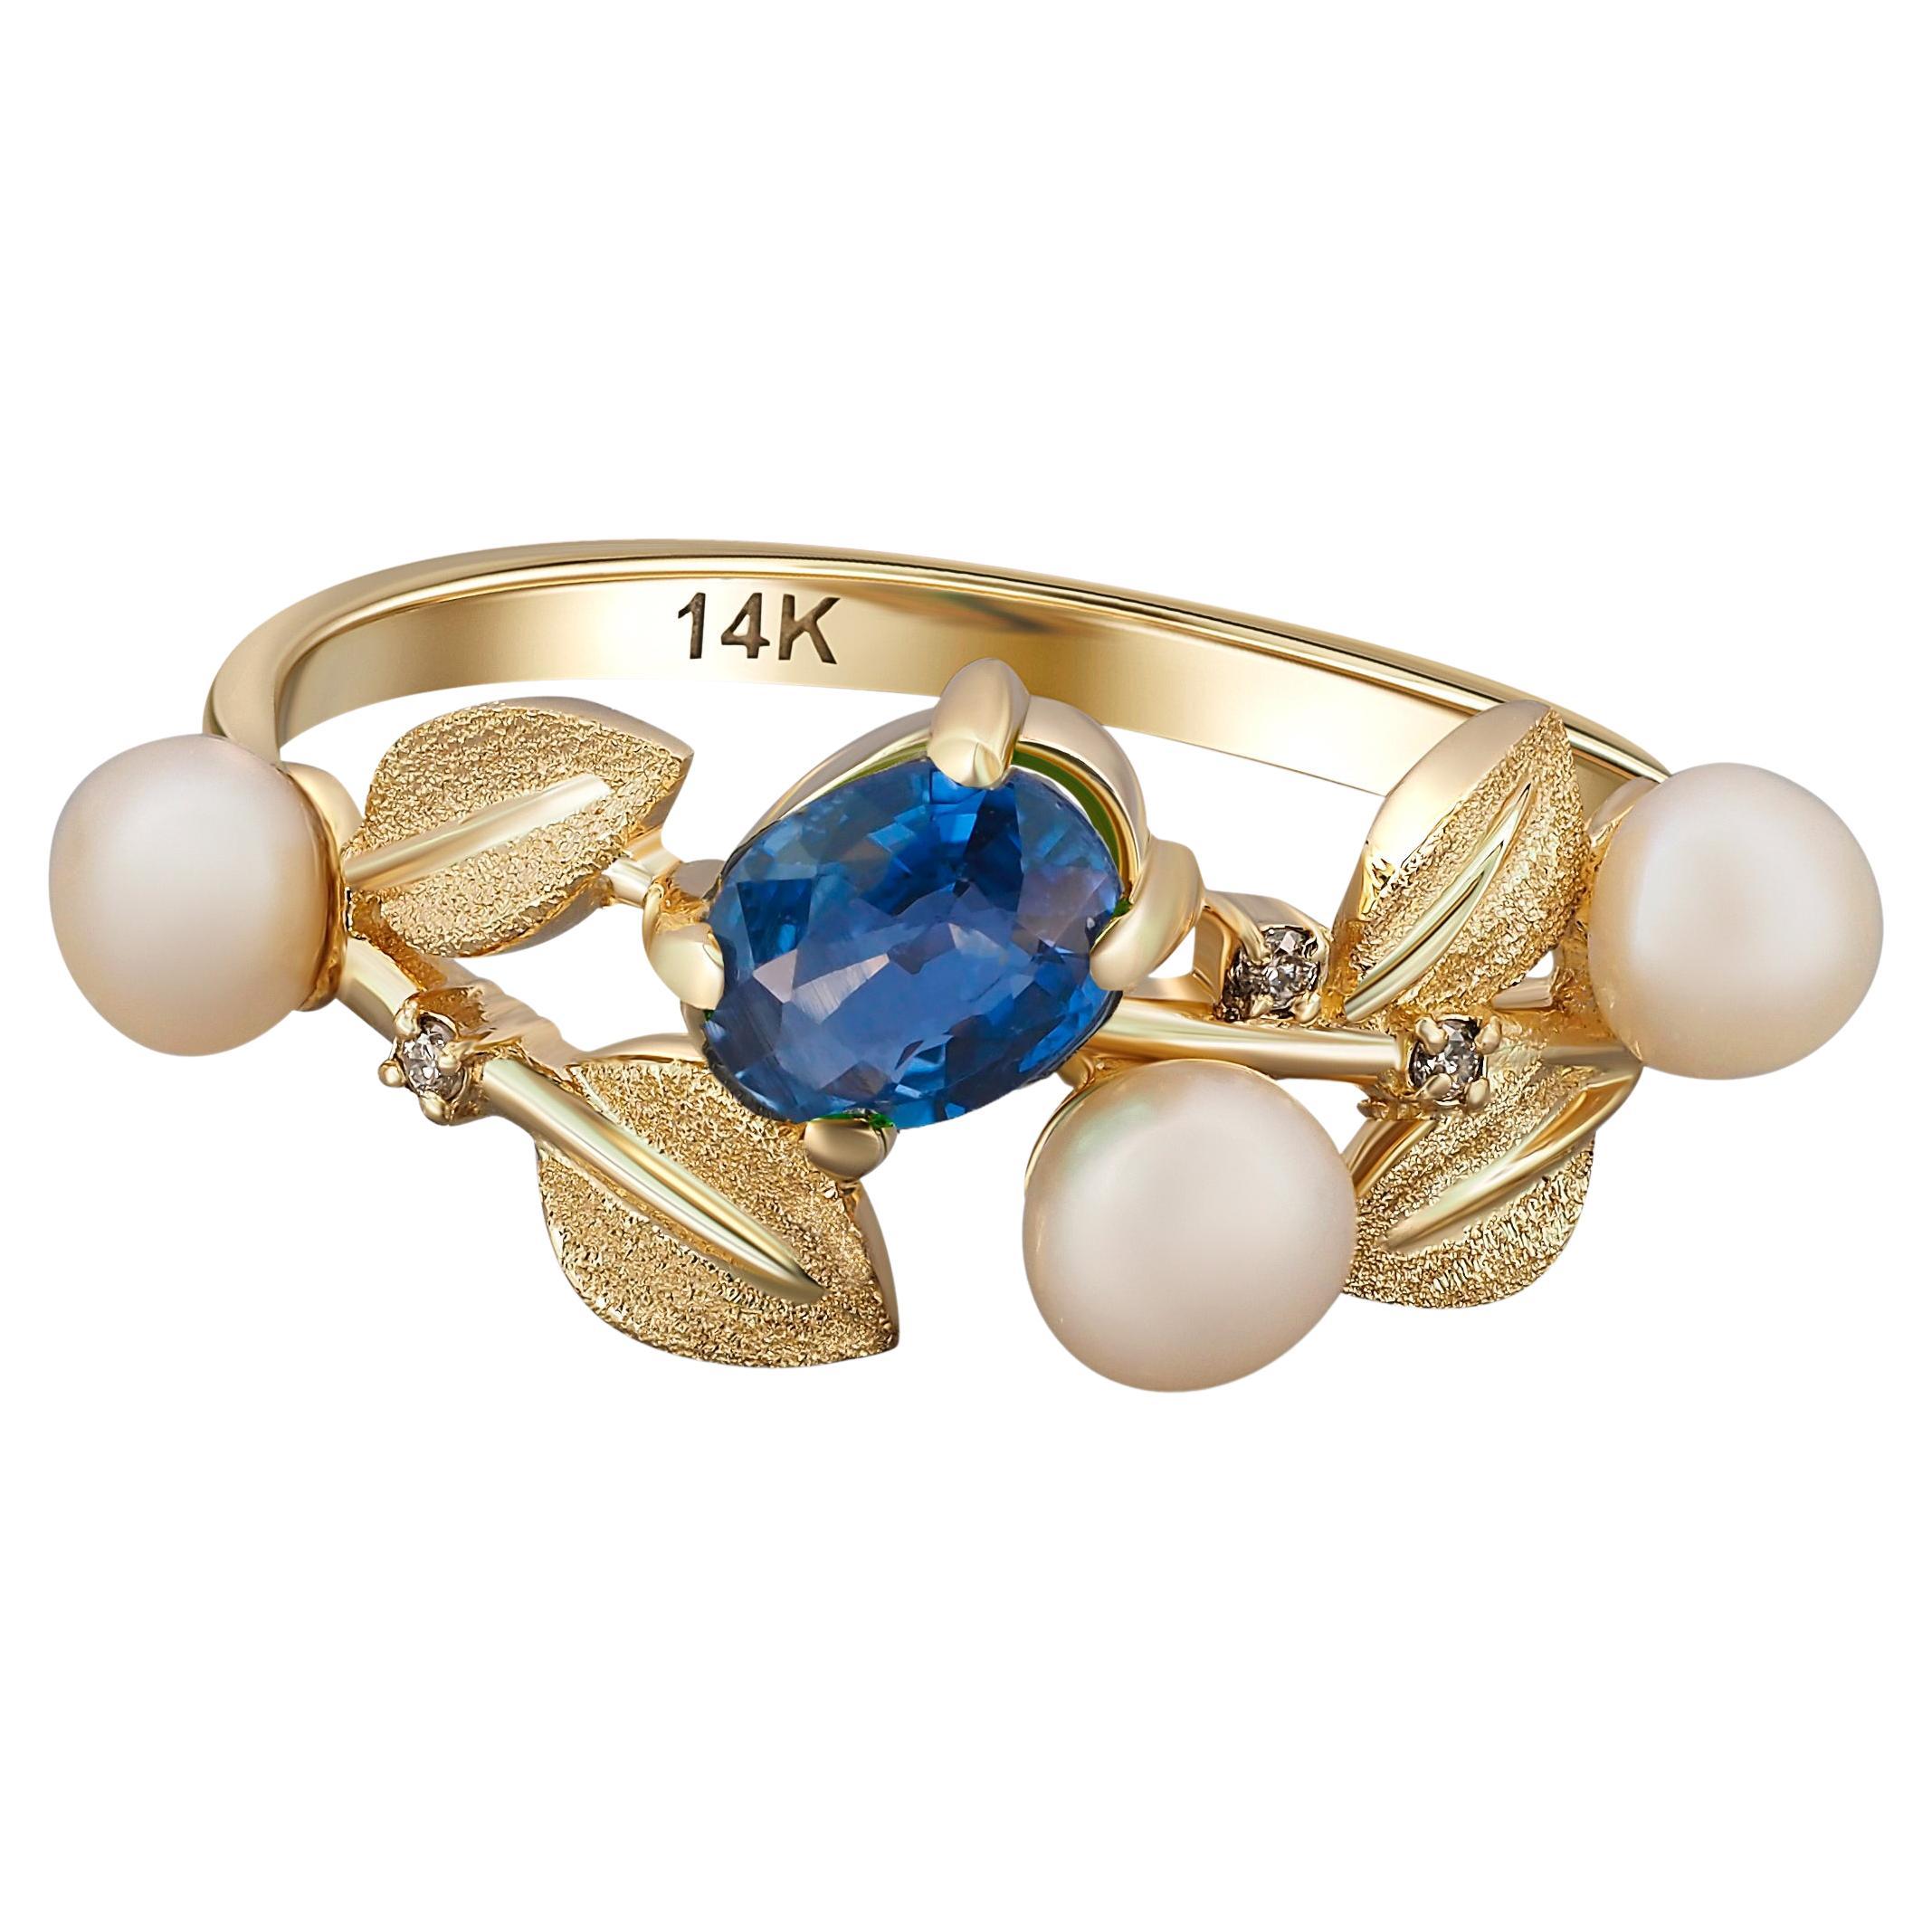 For Sale:  14k Gold Floral Ring with Sapphire, Diamonds and Pearls